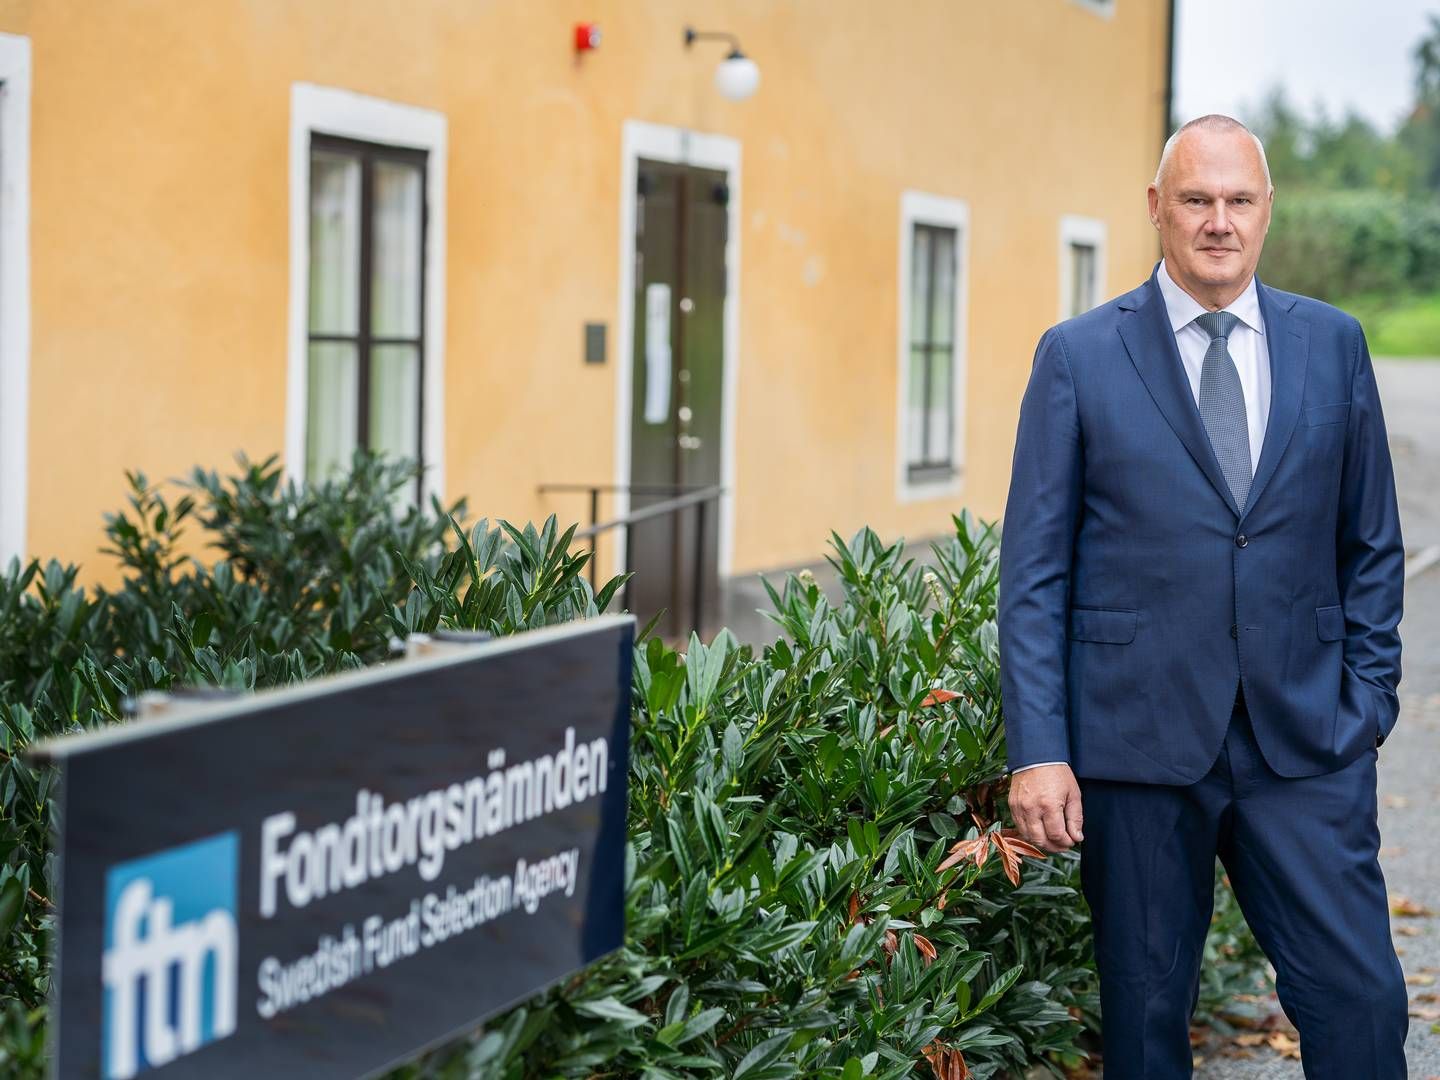 Erik Fransson is the executive director of the Swedish Fund Selection Agency. | Photo: Fondtorgsnämnden / PR